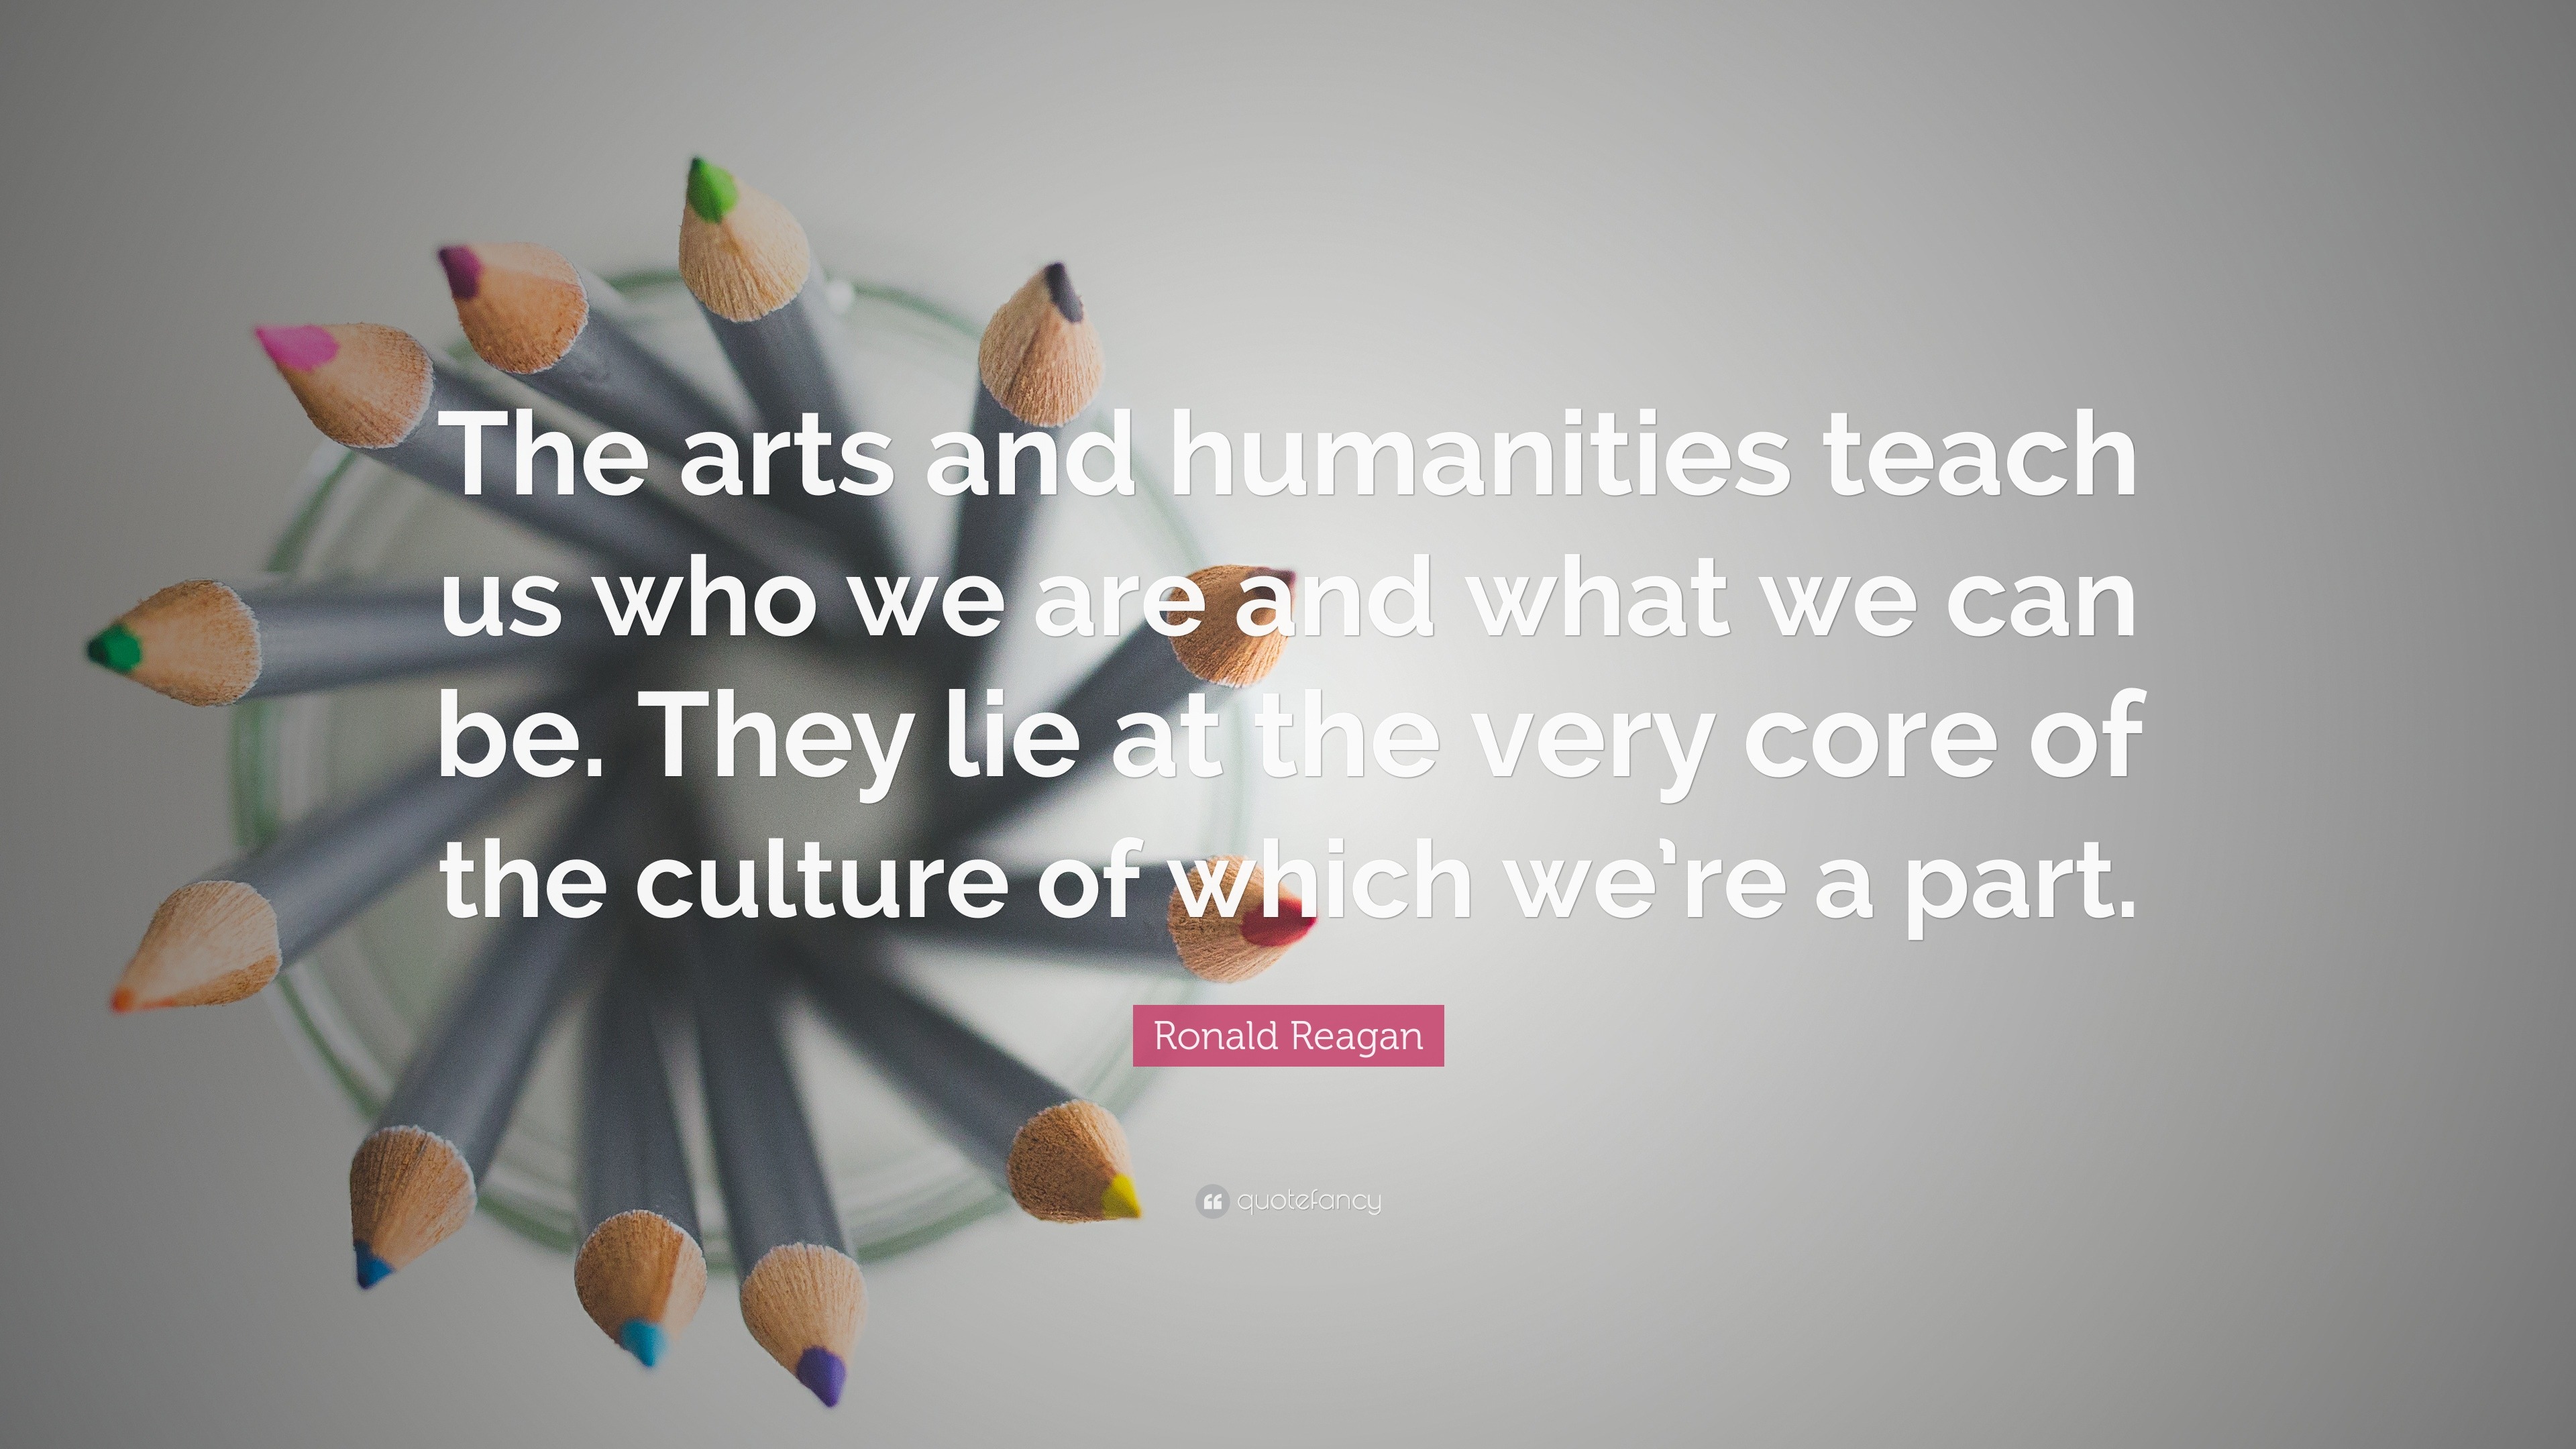 Ronald Reagan Quote: “The arts and humanities teach us who we are and what  we can be. They lie at the very core of the culture of which we're ...”